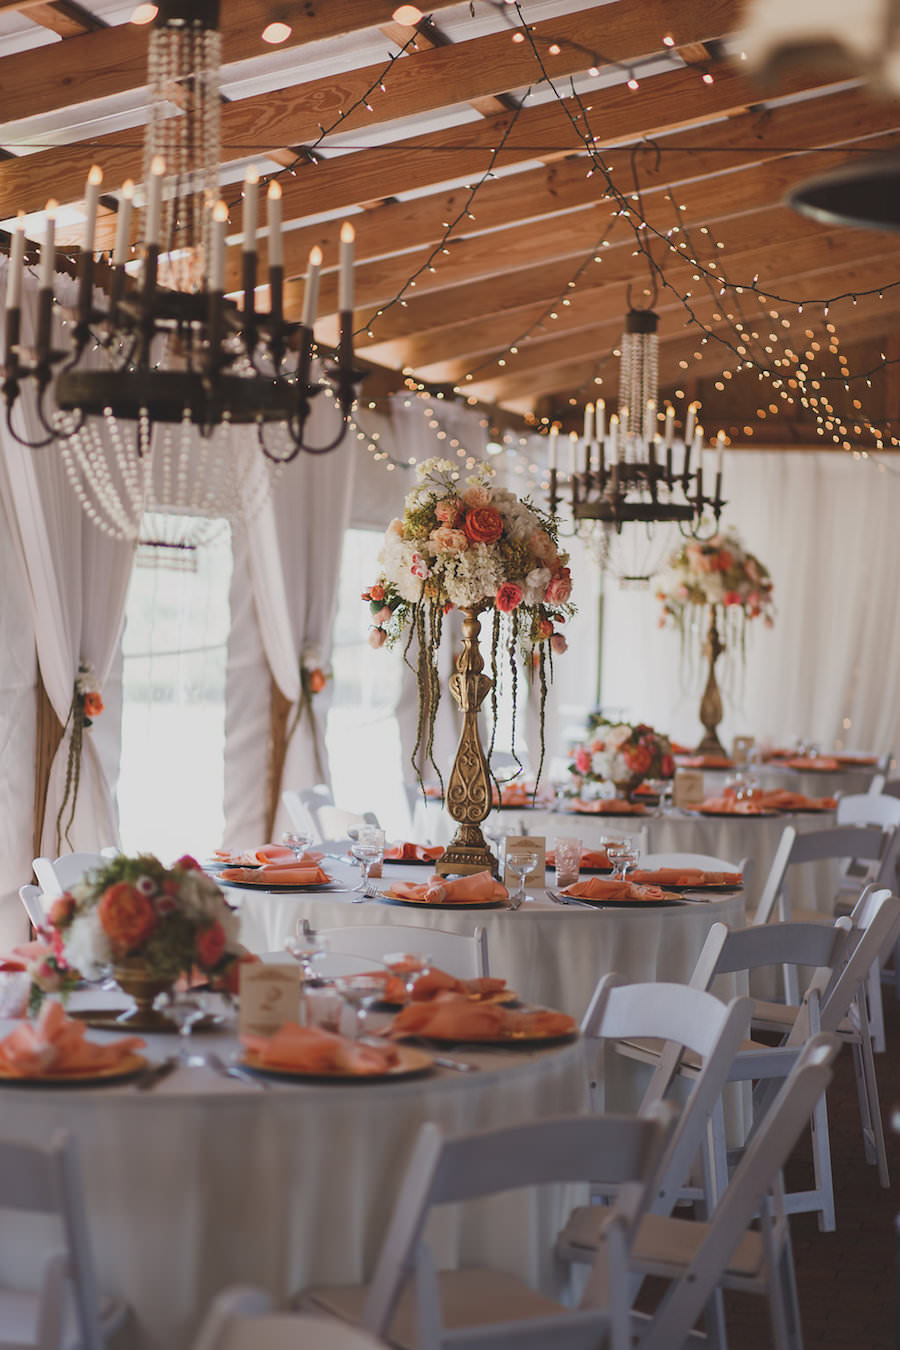 Rustic Elegance Wedding Reception with Blush, Gold and White Tall Centerpieces and Market String Lights | Tampa Wedding Venue Cross Creek Ranch